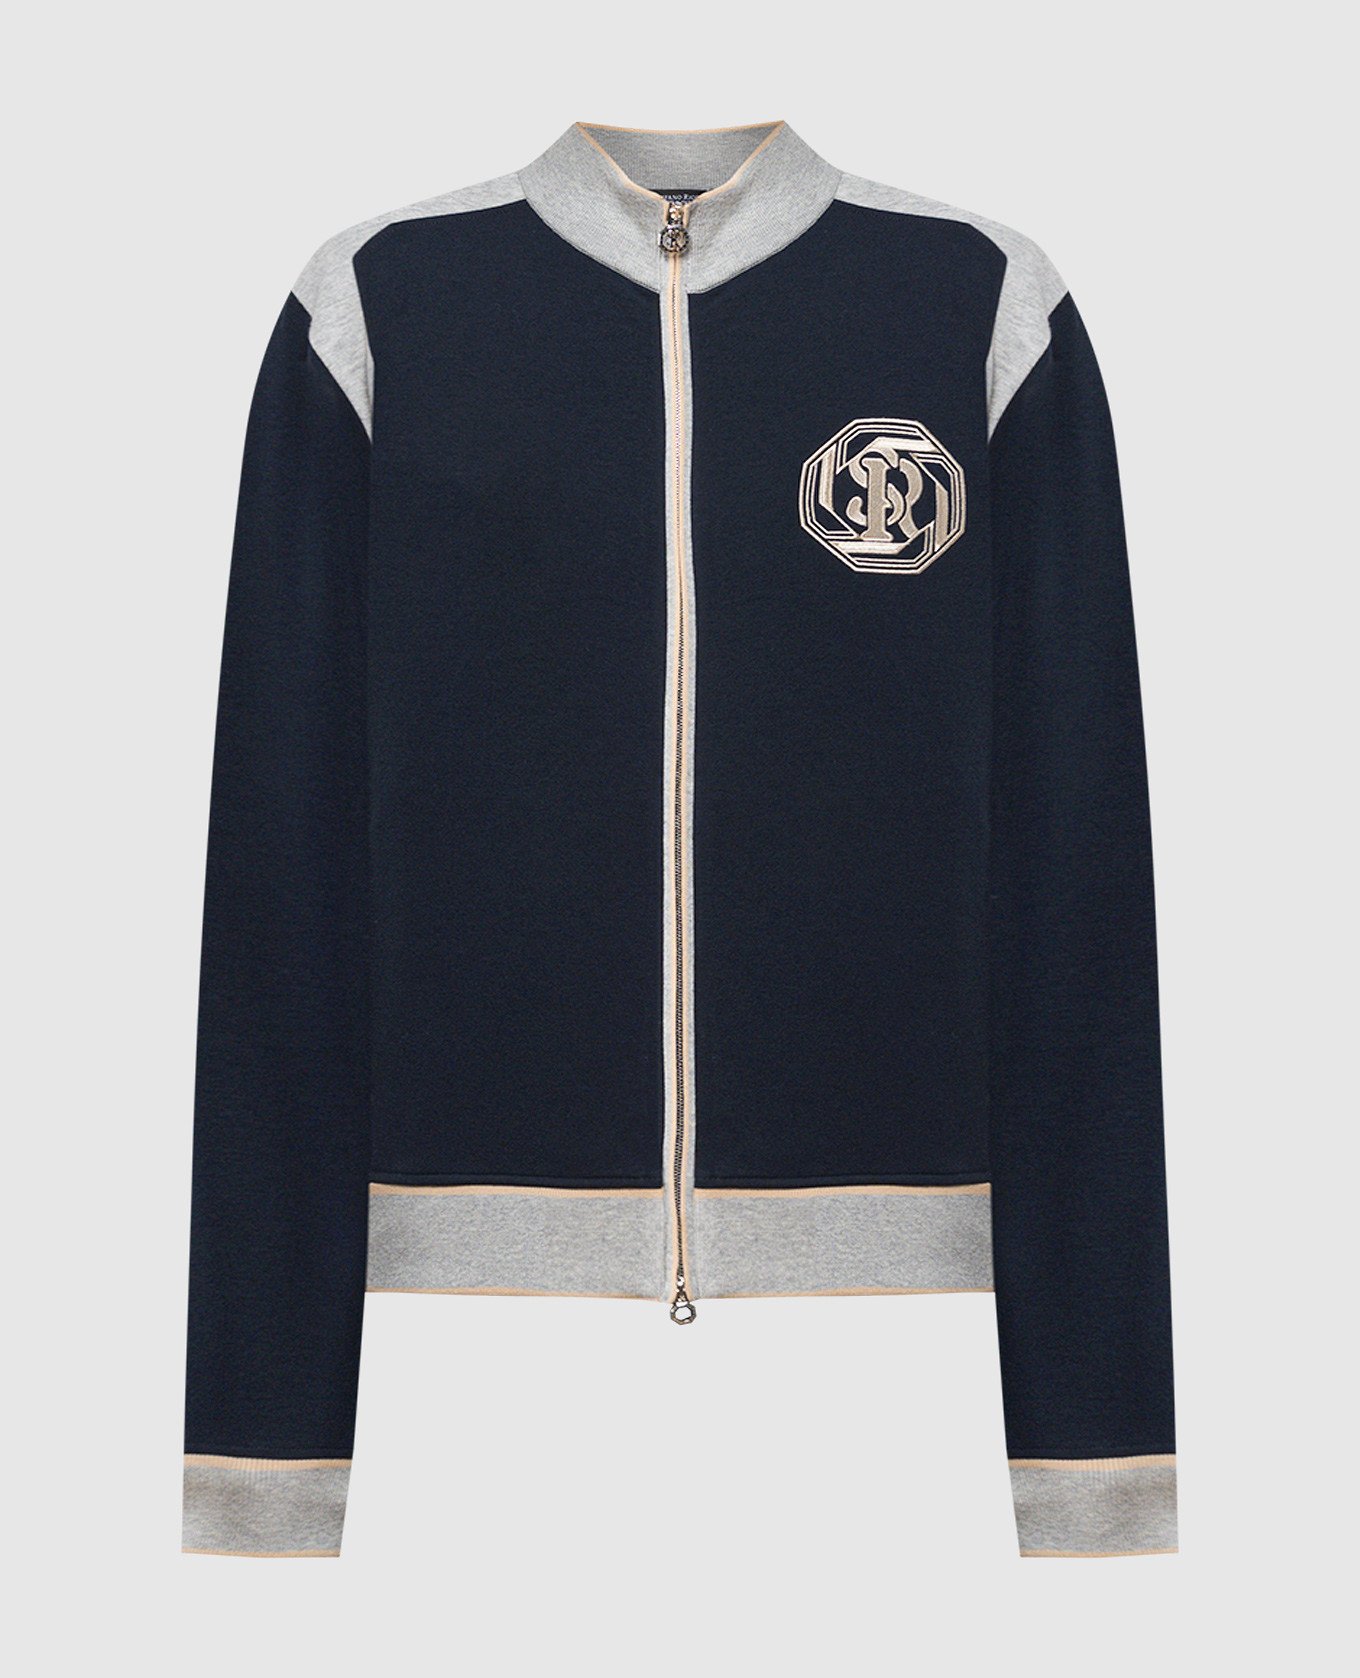 Blue sports jacket with logo embroidery